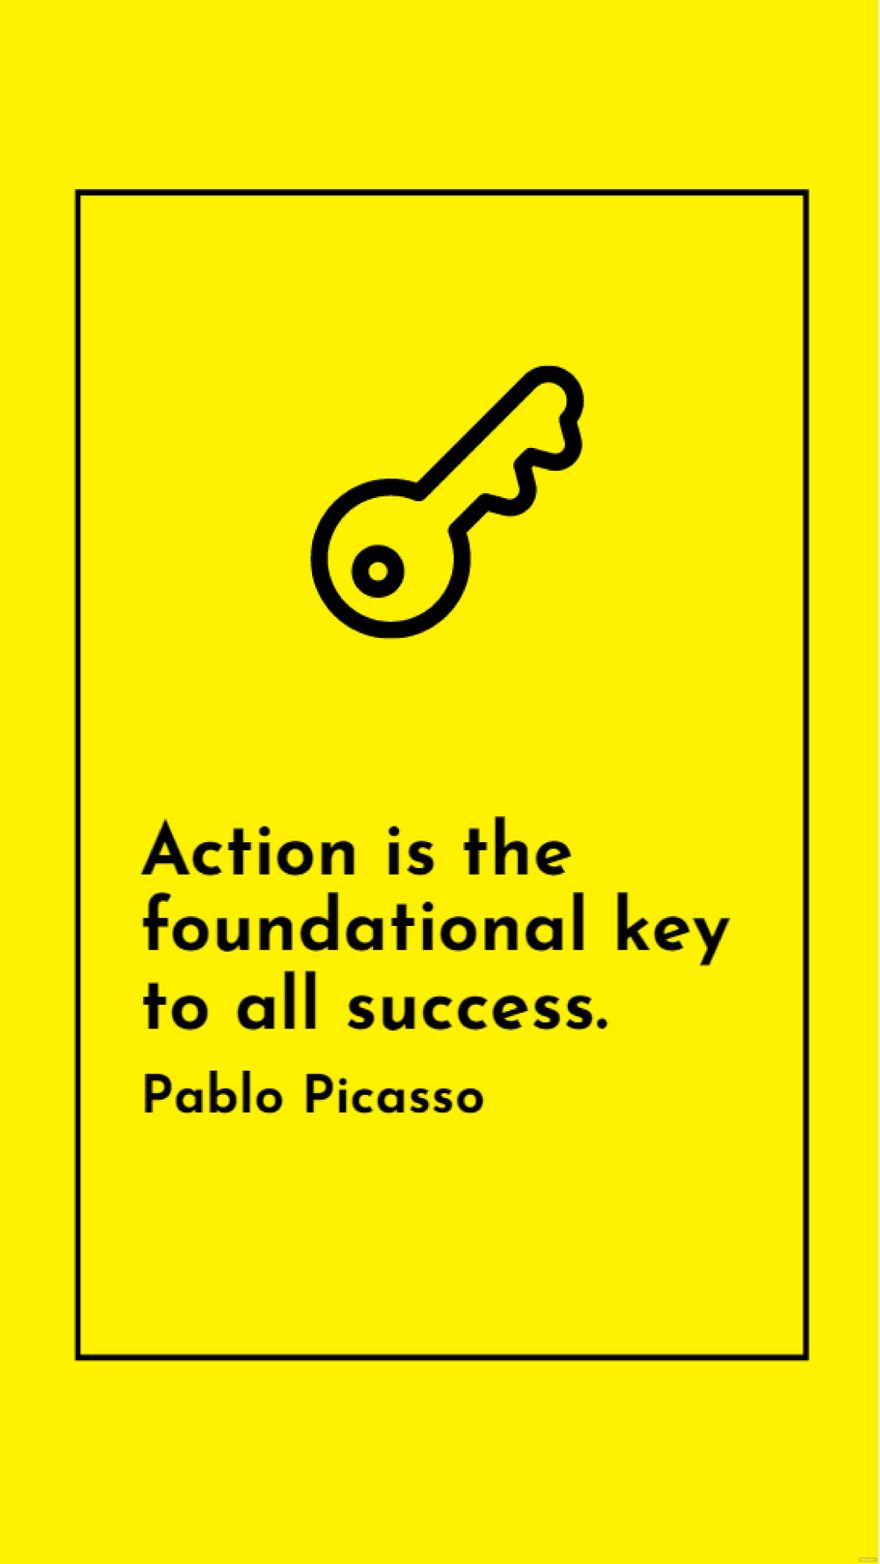 Pablo Picasso - Action is the foundational key to all success.